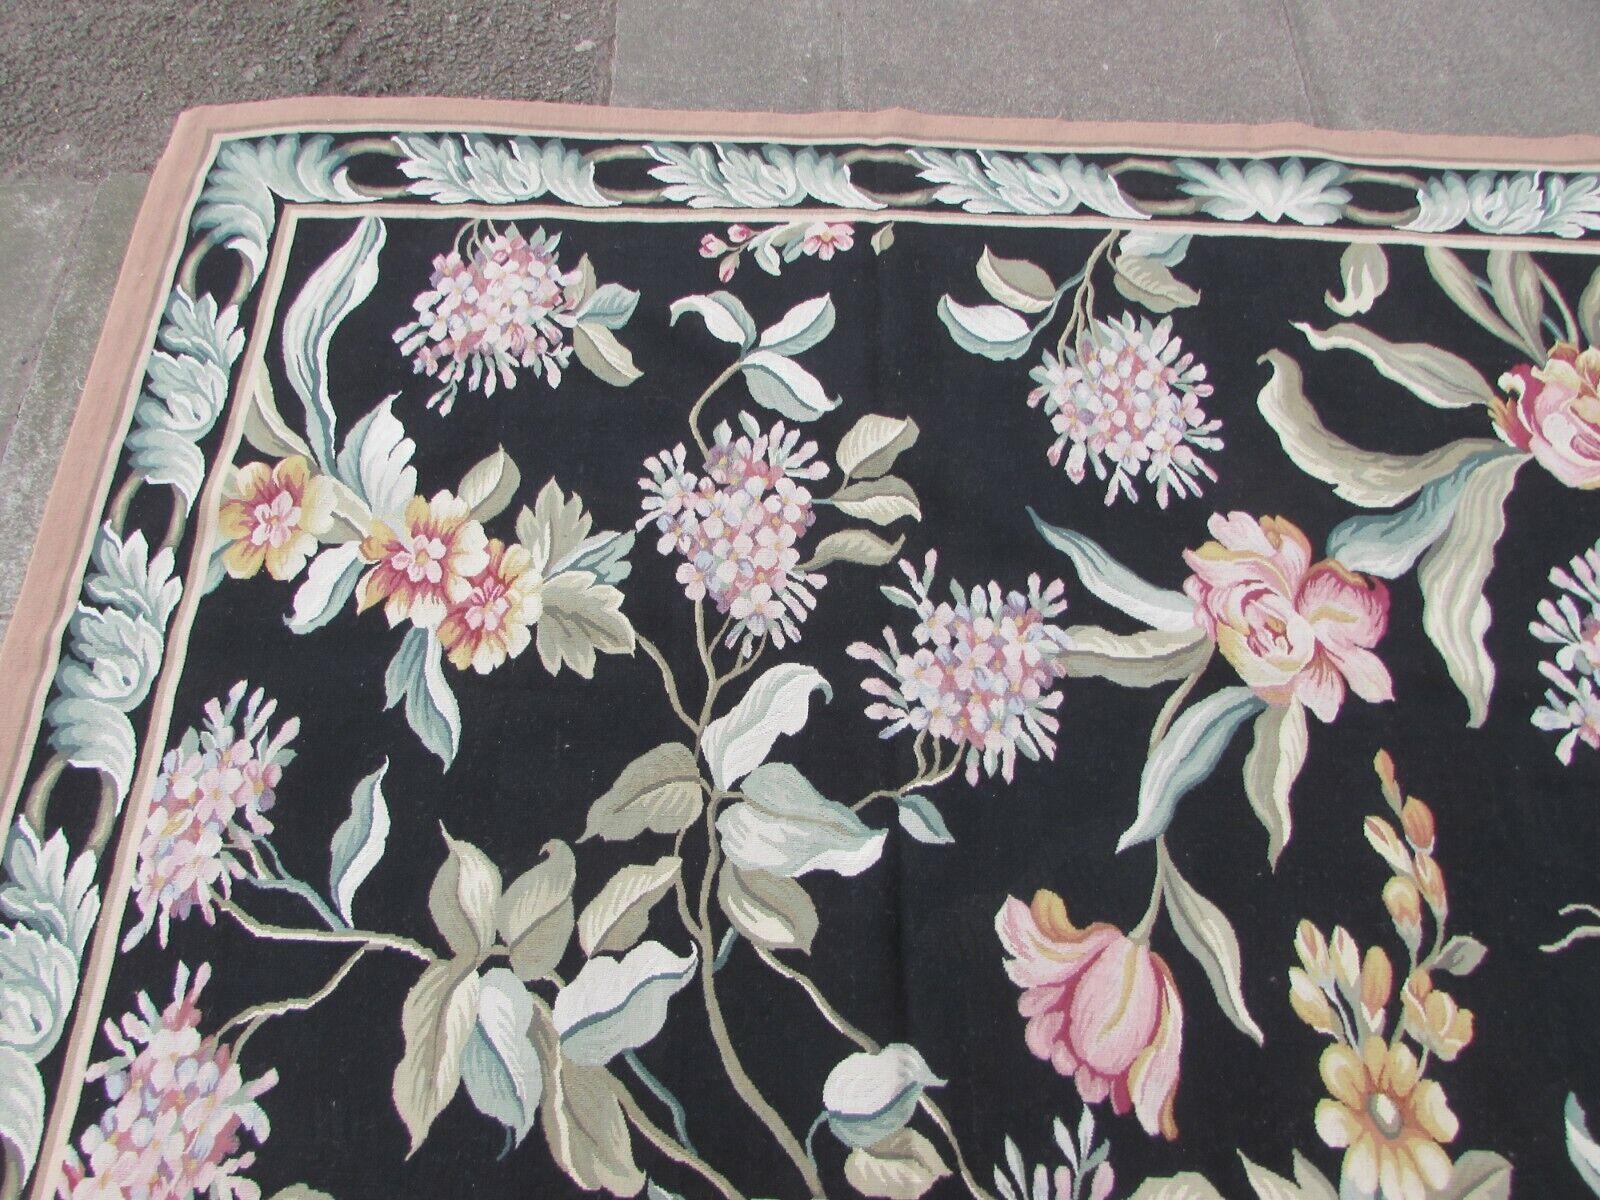 Late 20th Century Handmade Vintage French Aubusson Rug 8.8' x 12.2', 1970s, 1Q51 For Sale